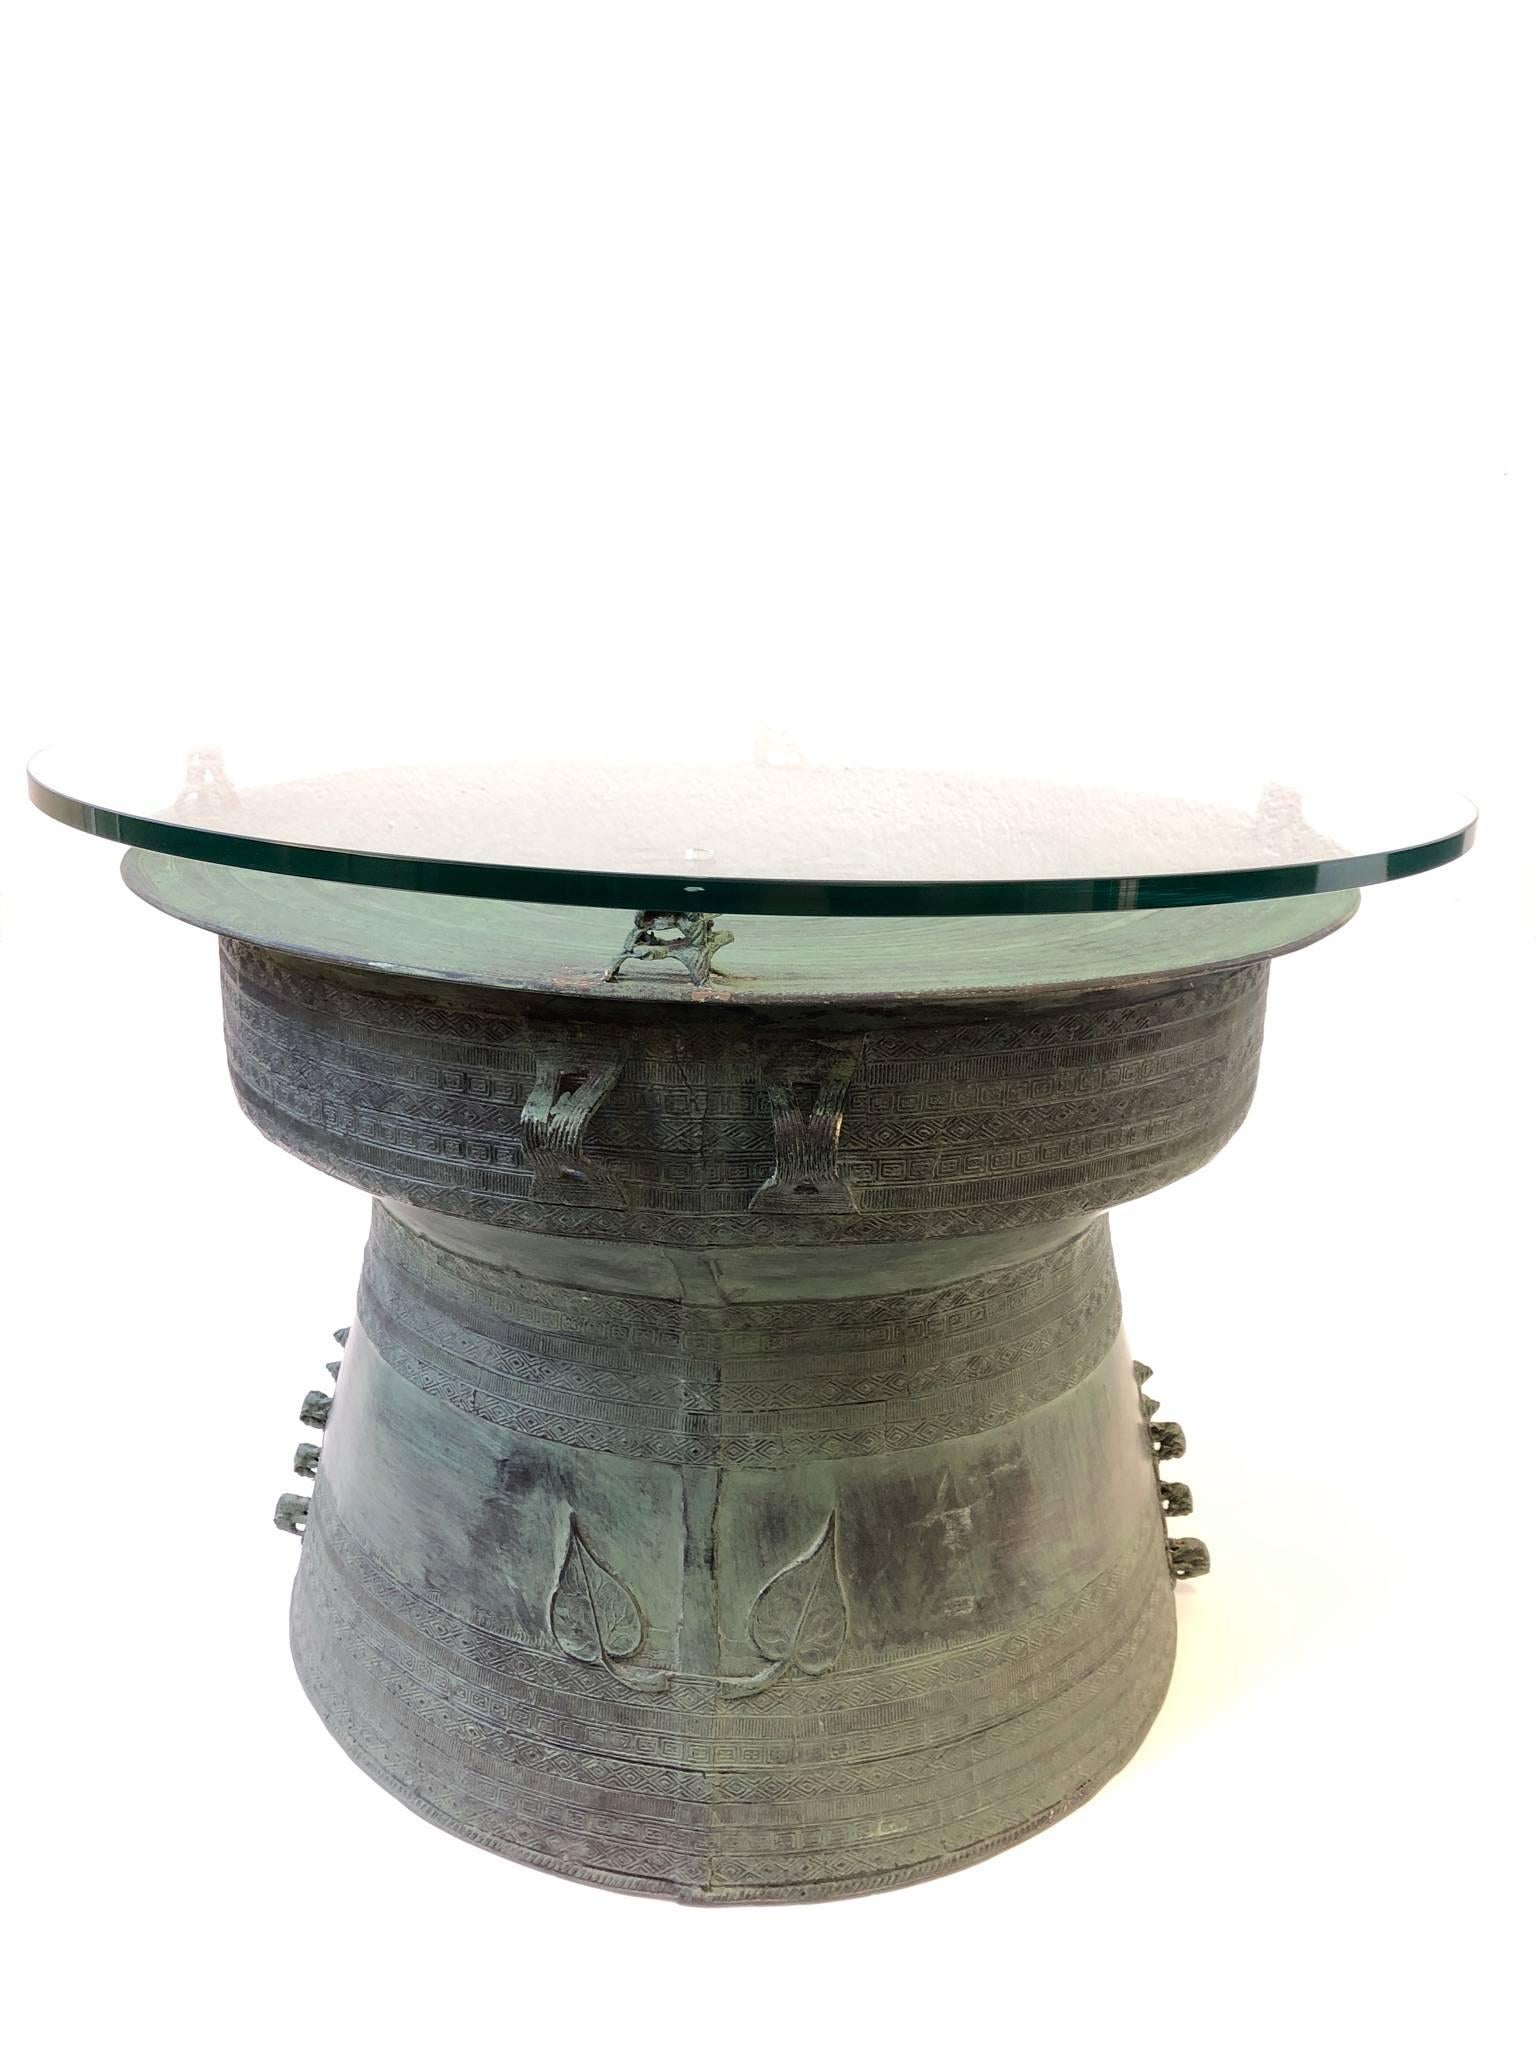 Other Pair of Bronze and Glass South Asian Rain Drum Tables